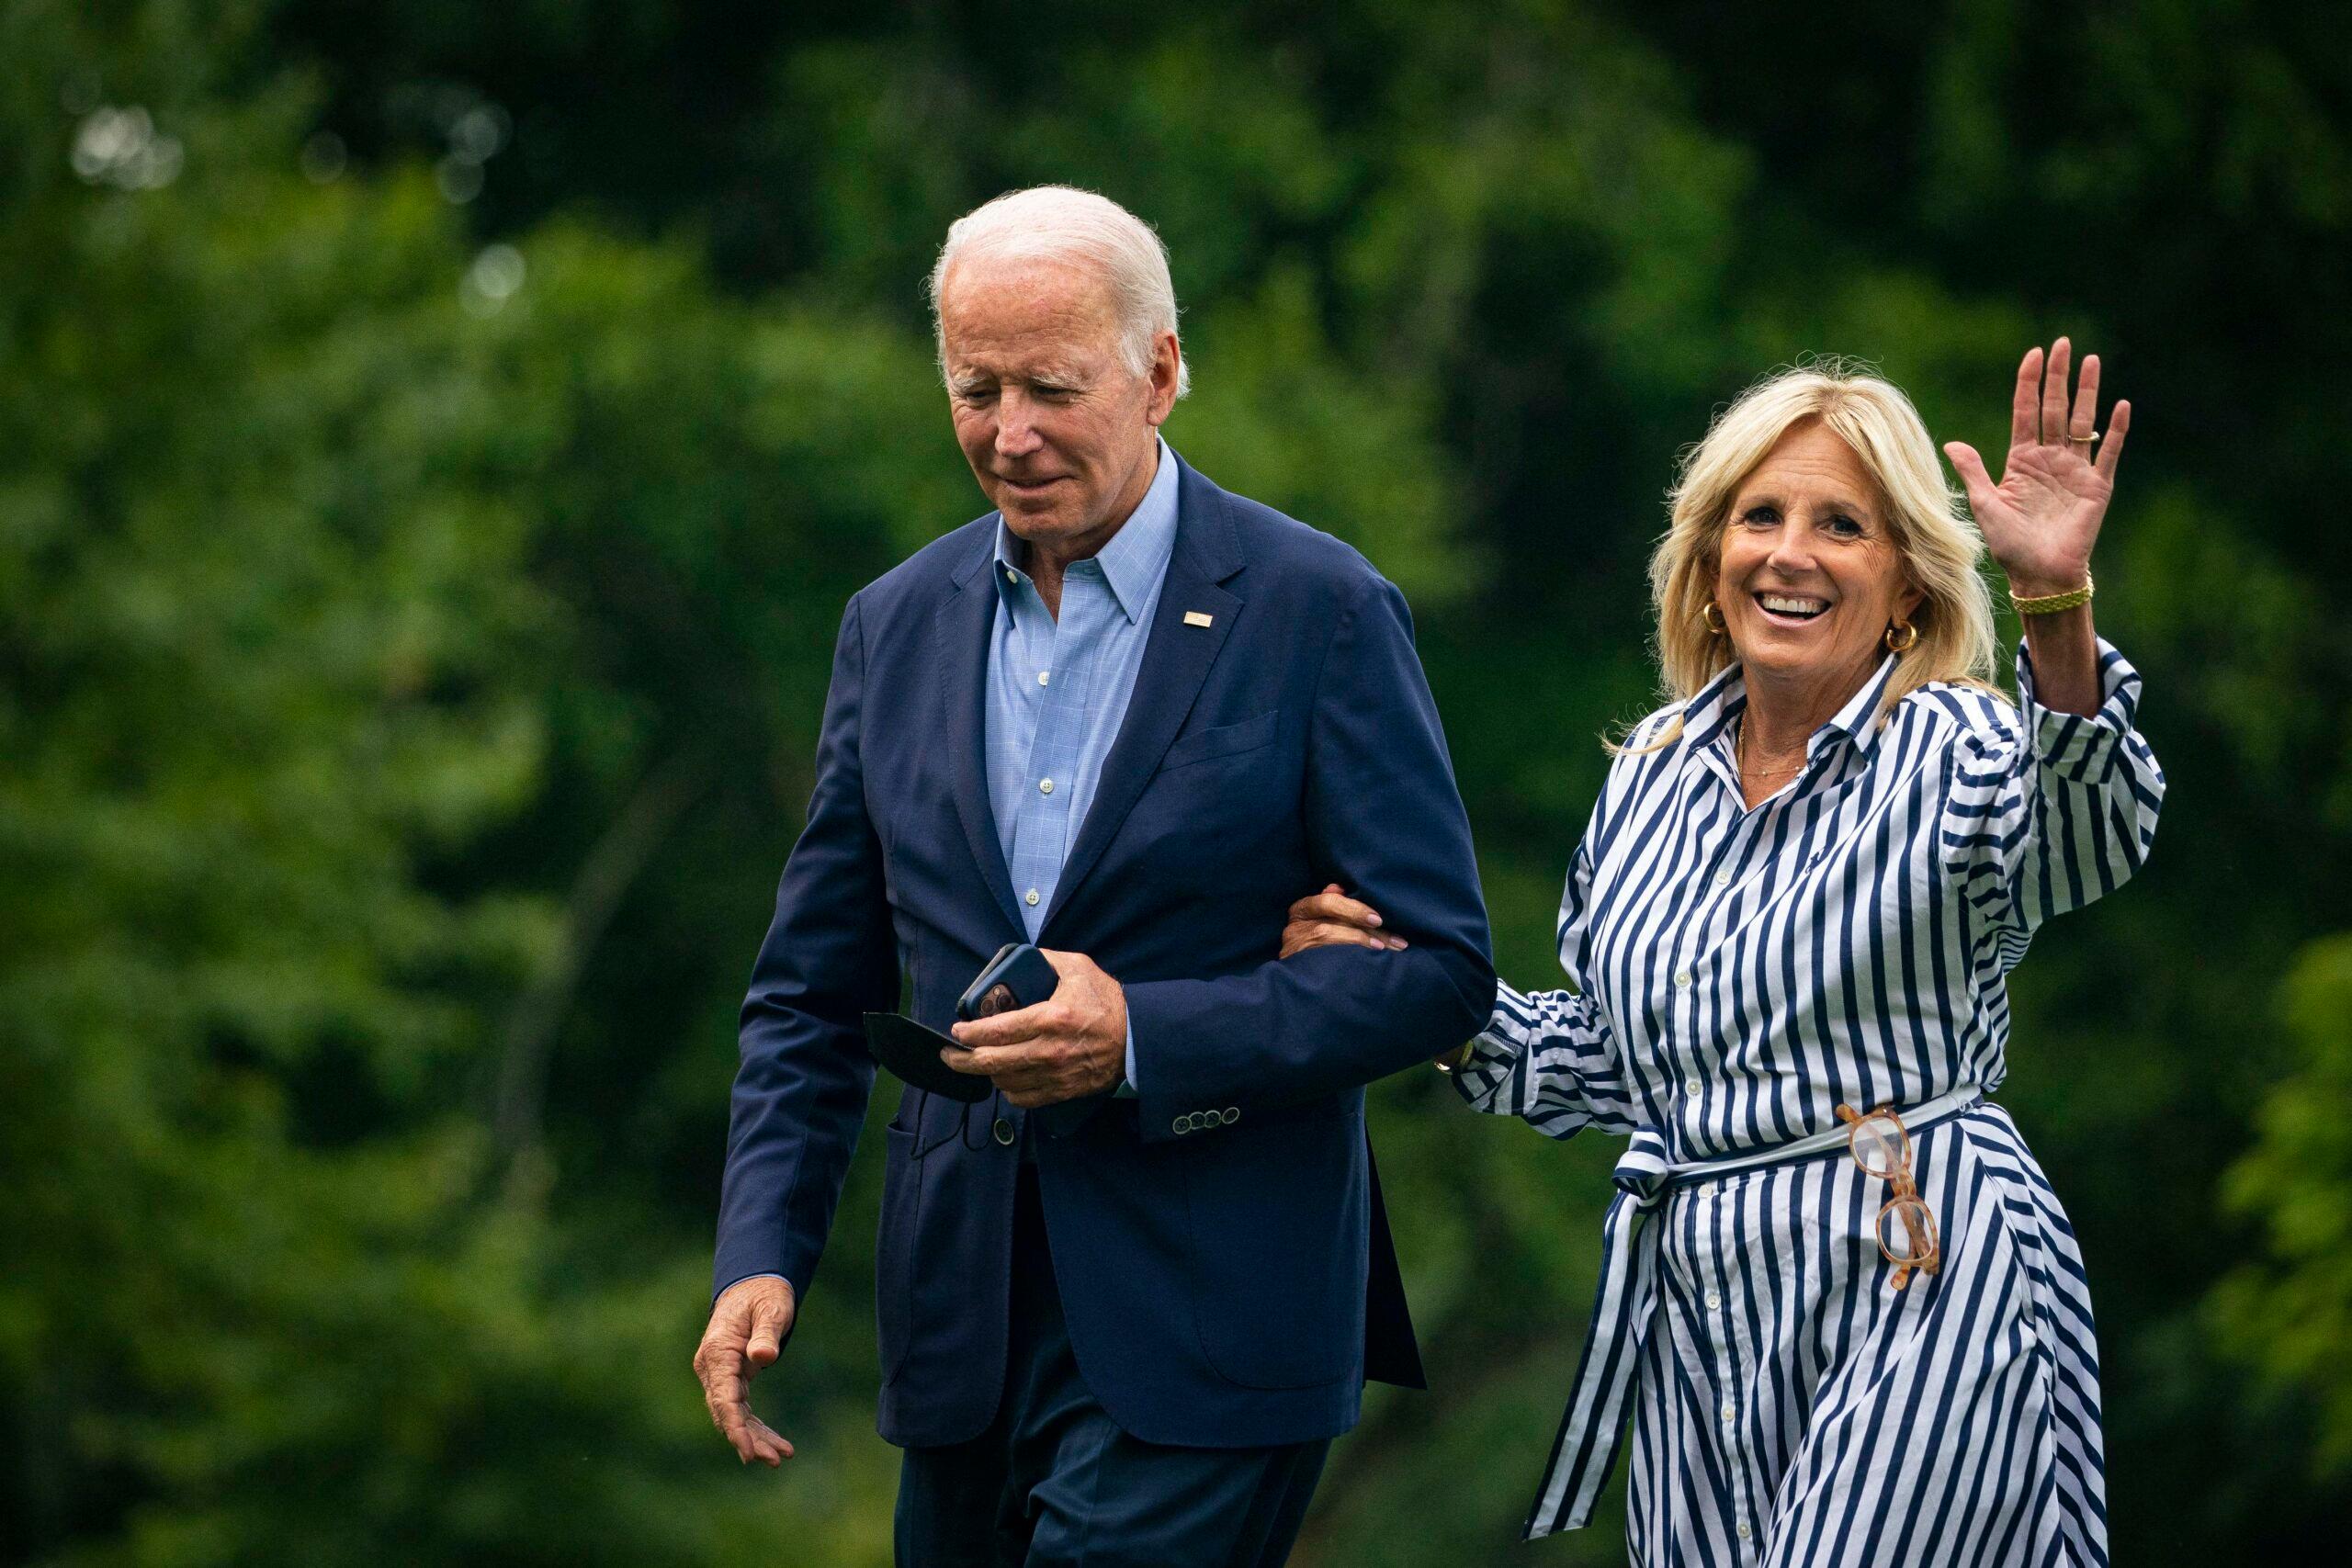 United States President Joe Biden and First Lady Jill Biden walk on the South Lawn of the White House after arriving on Marine One in Washington, D.C